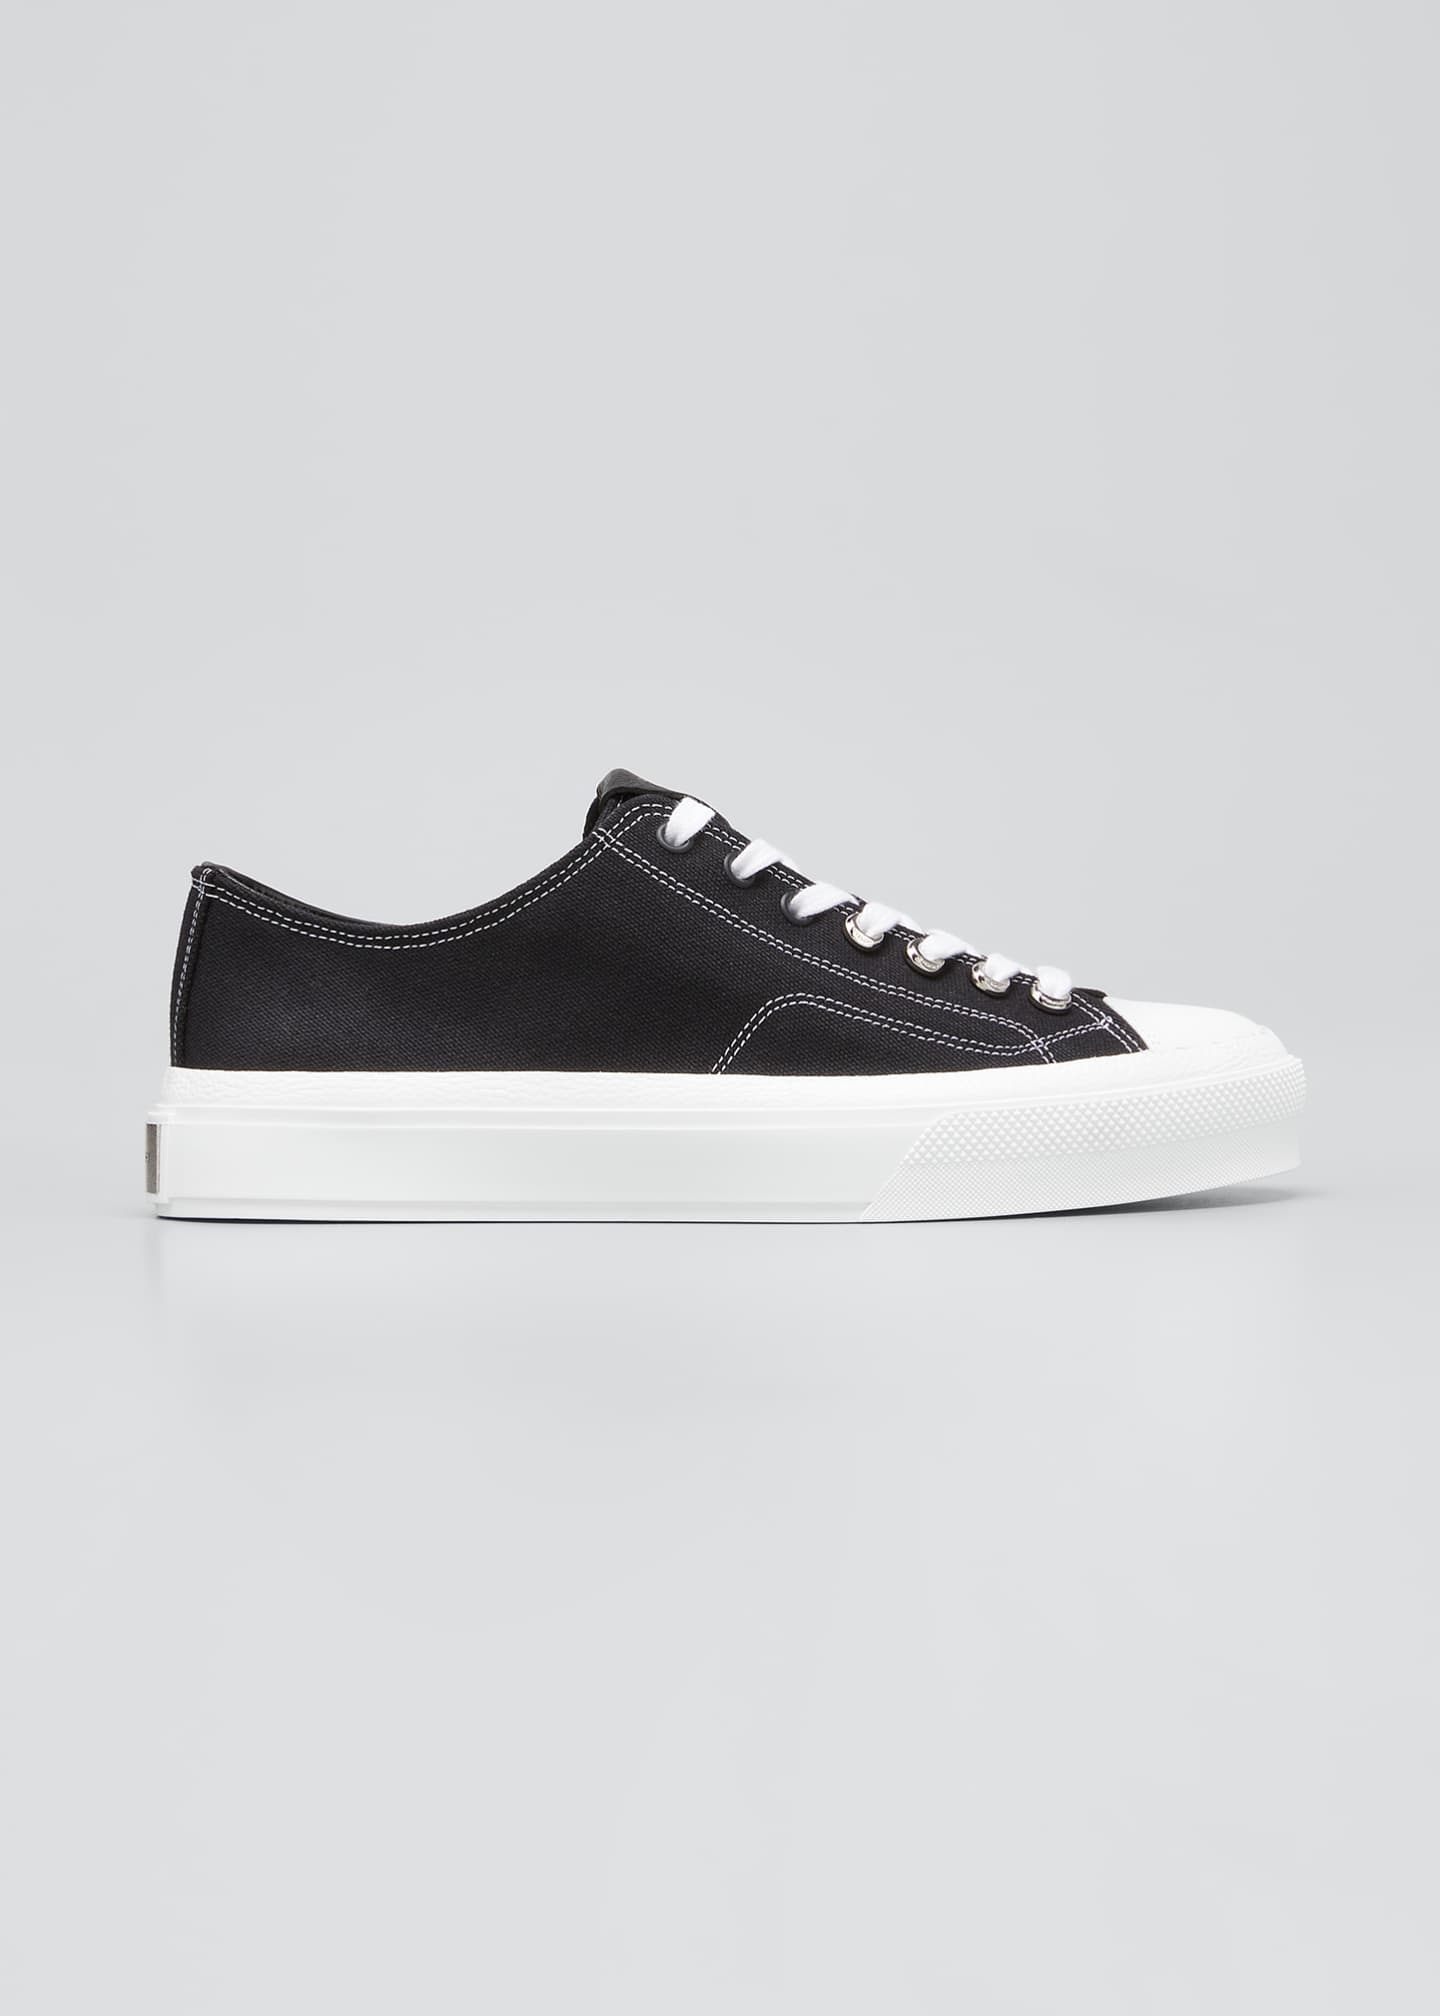 Givenchy City Canvas Low-Top Sneakers - Bergdorf Goodman